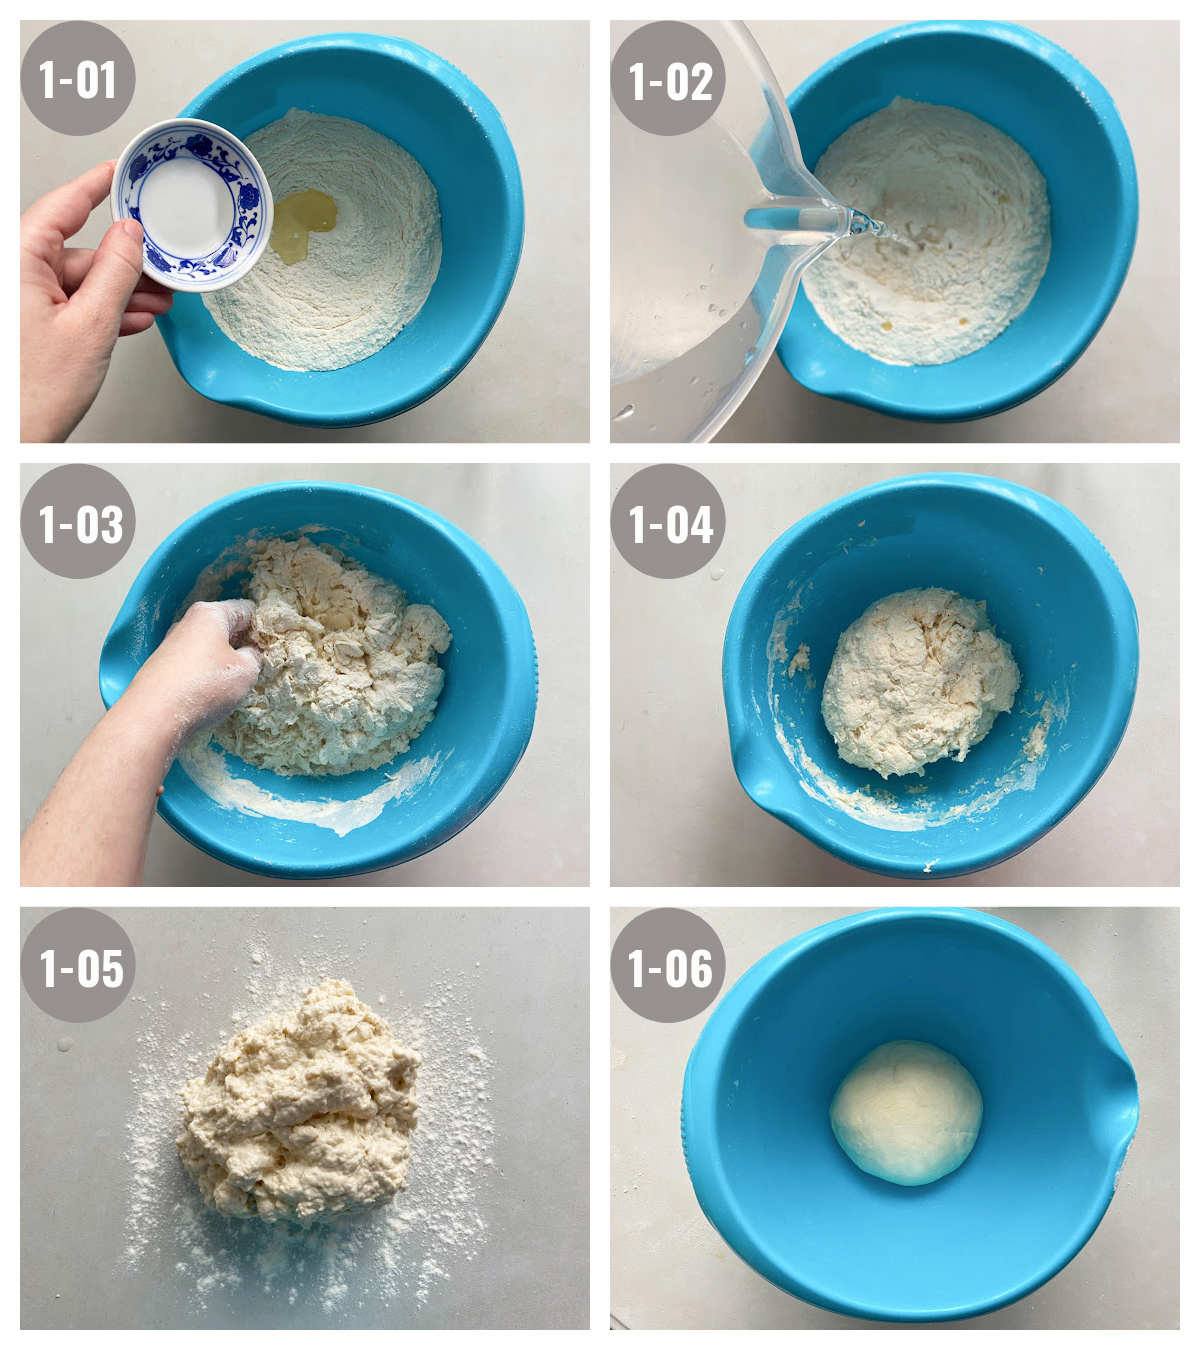 Six photos (2x3), of dough and ingredients poured into a blue bowl. 